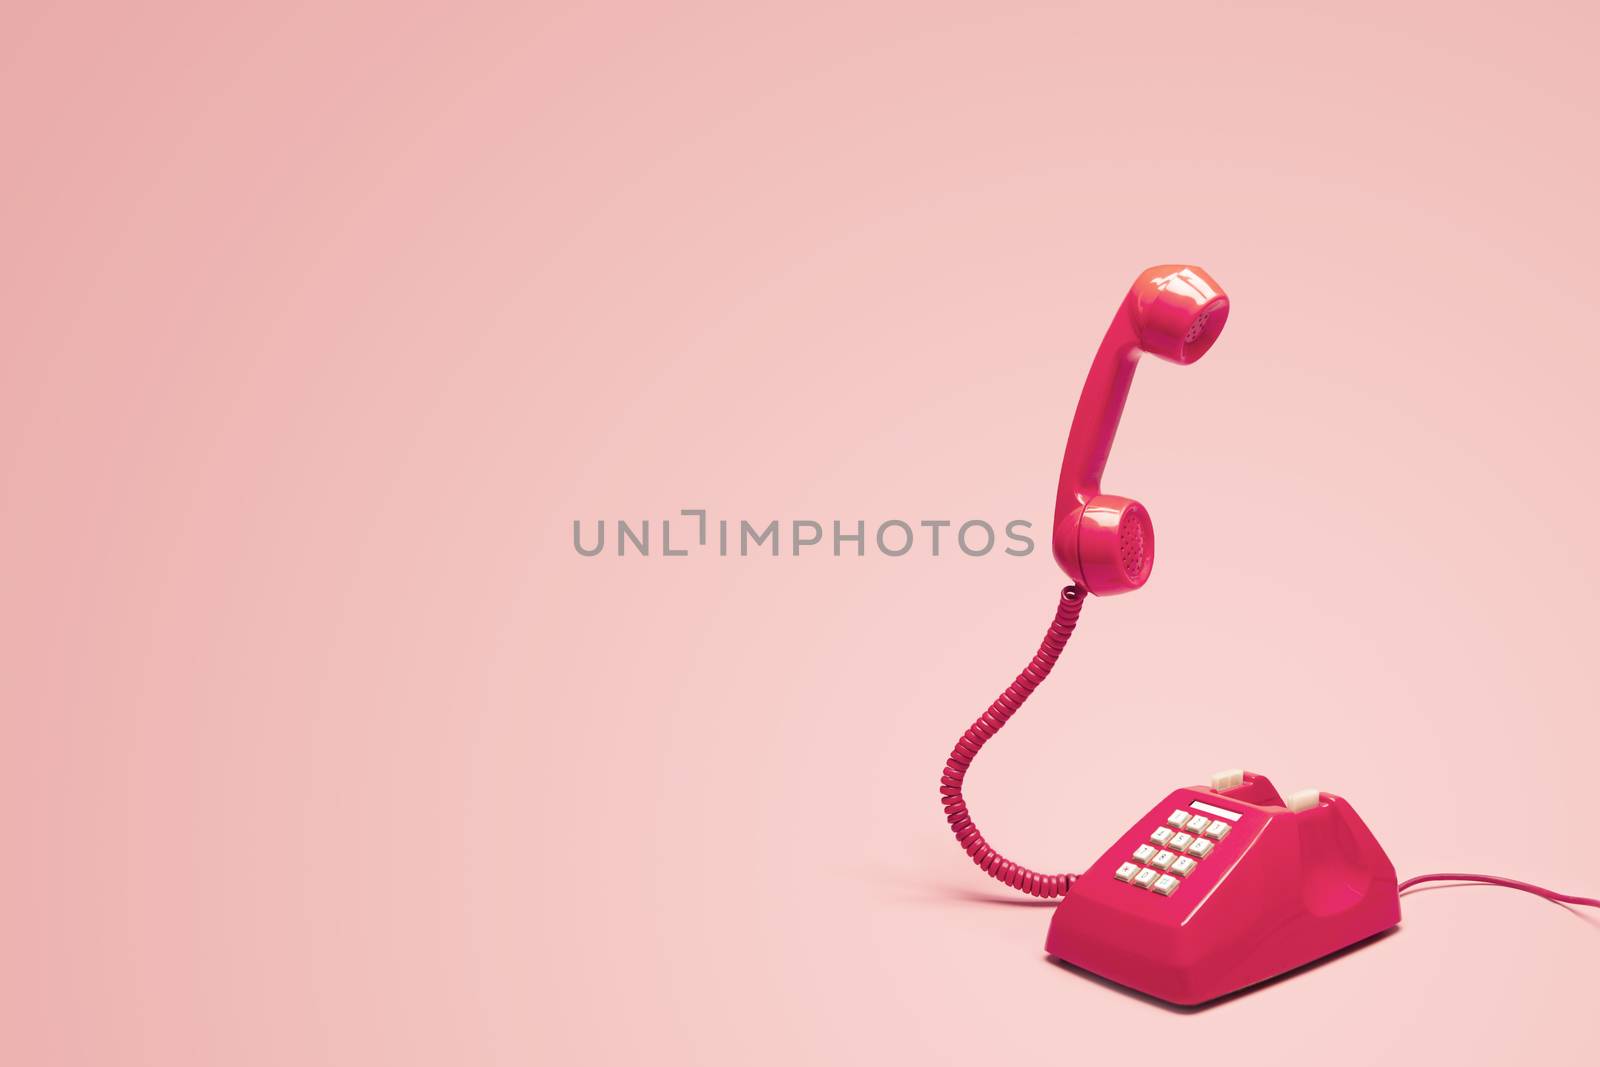 Retro pink telephone on retro pink background by zendograph